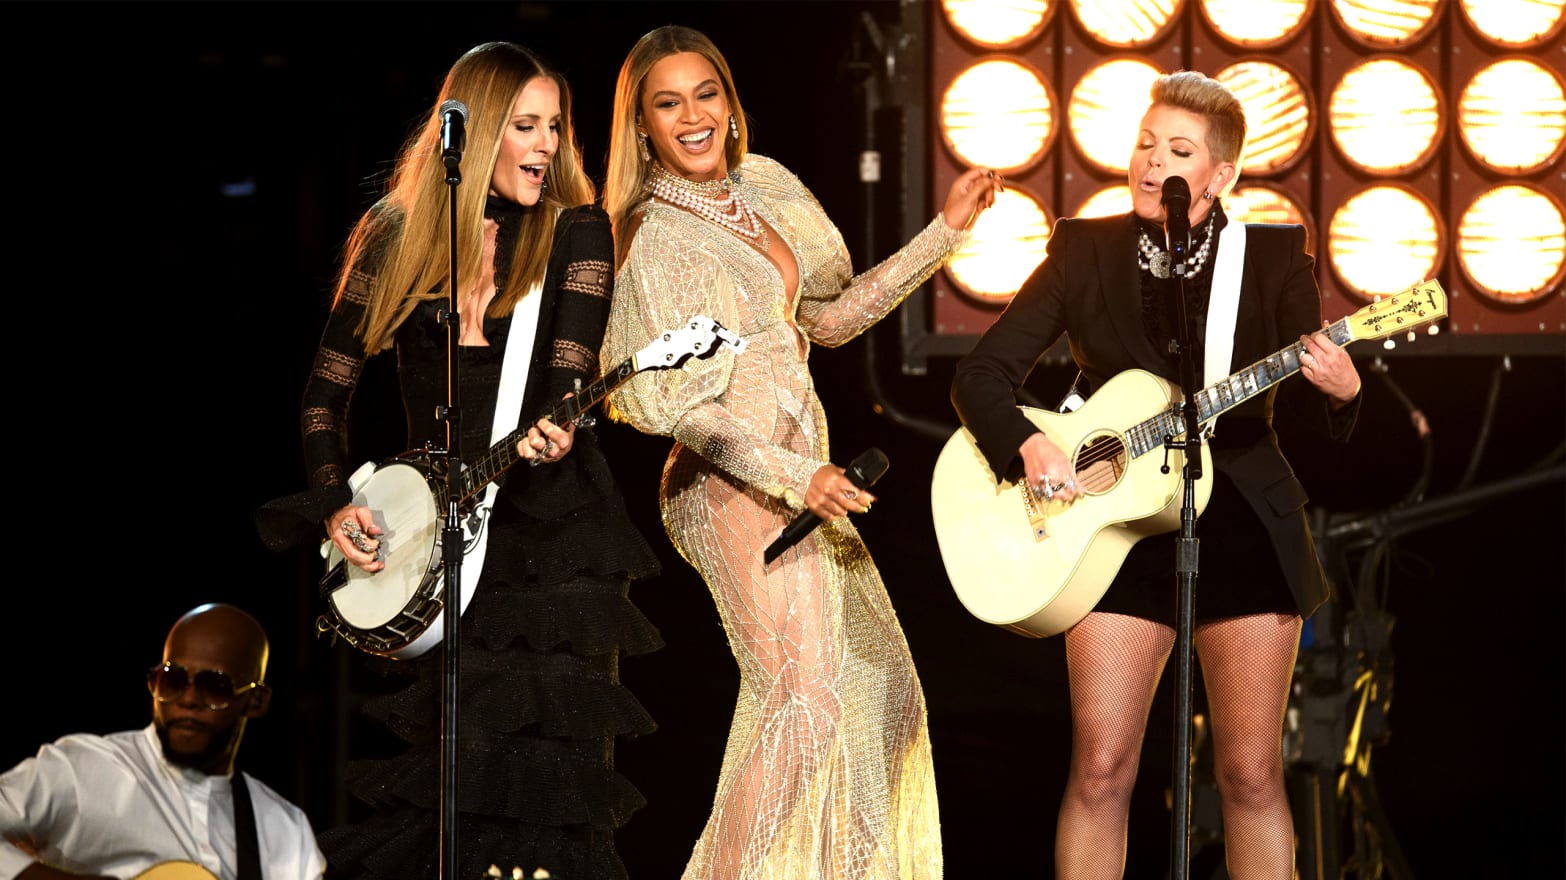 What Did Beyonce Do At Country Music Awards?